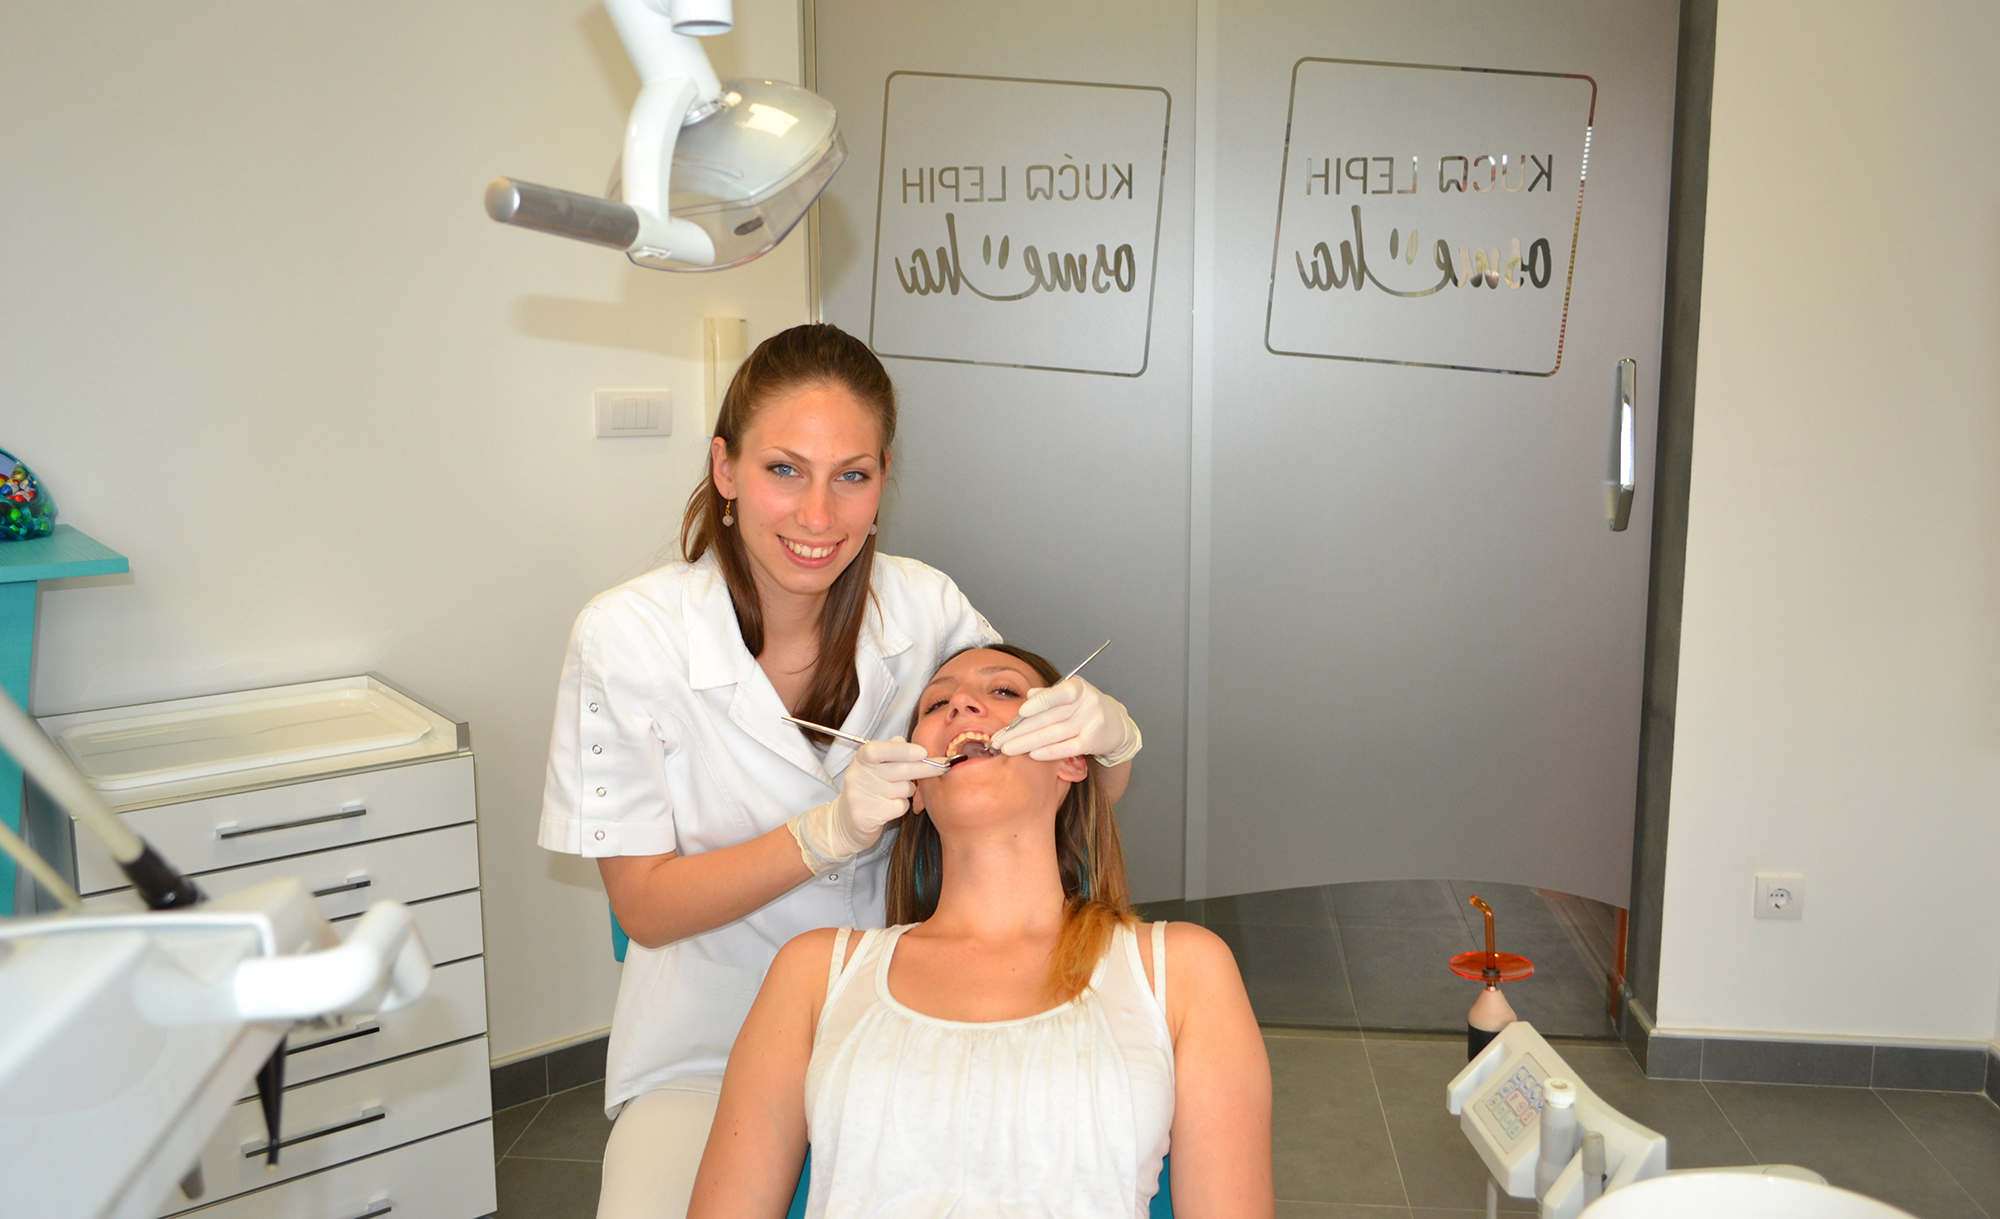 A photo of the dentist Tamara Ilic with a smiling patient